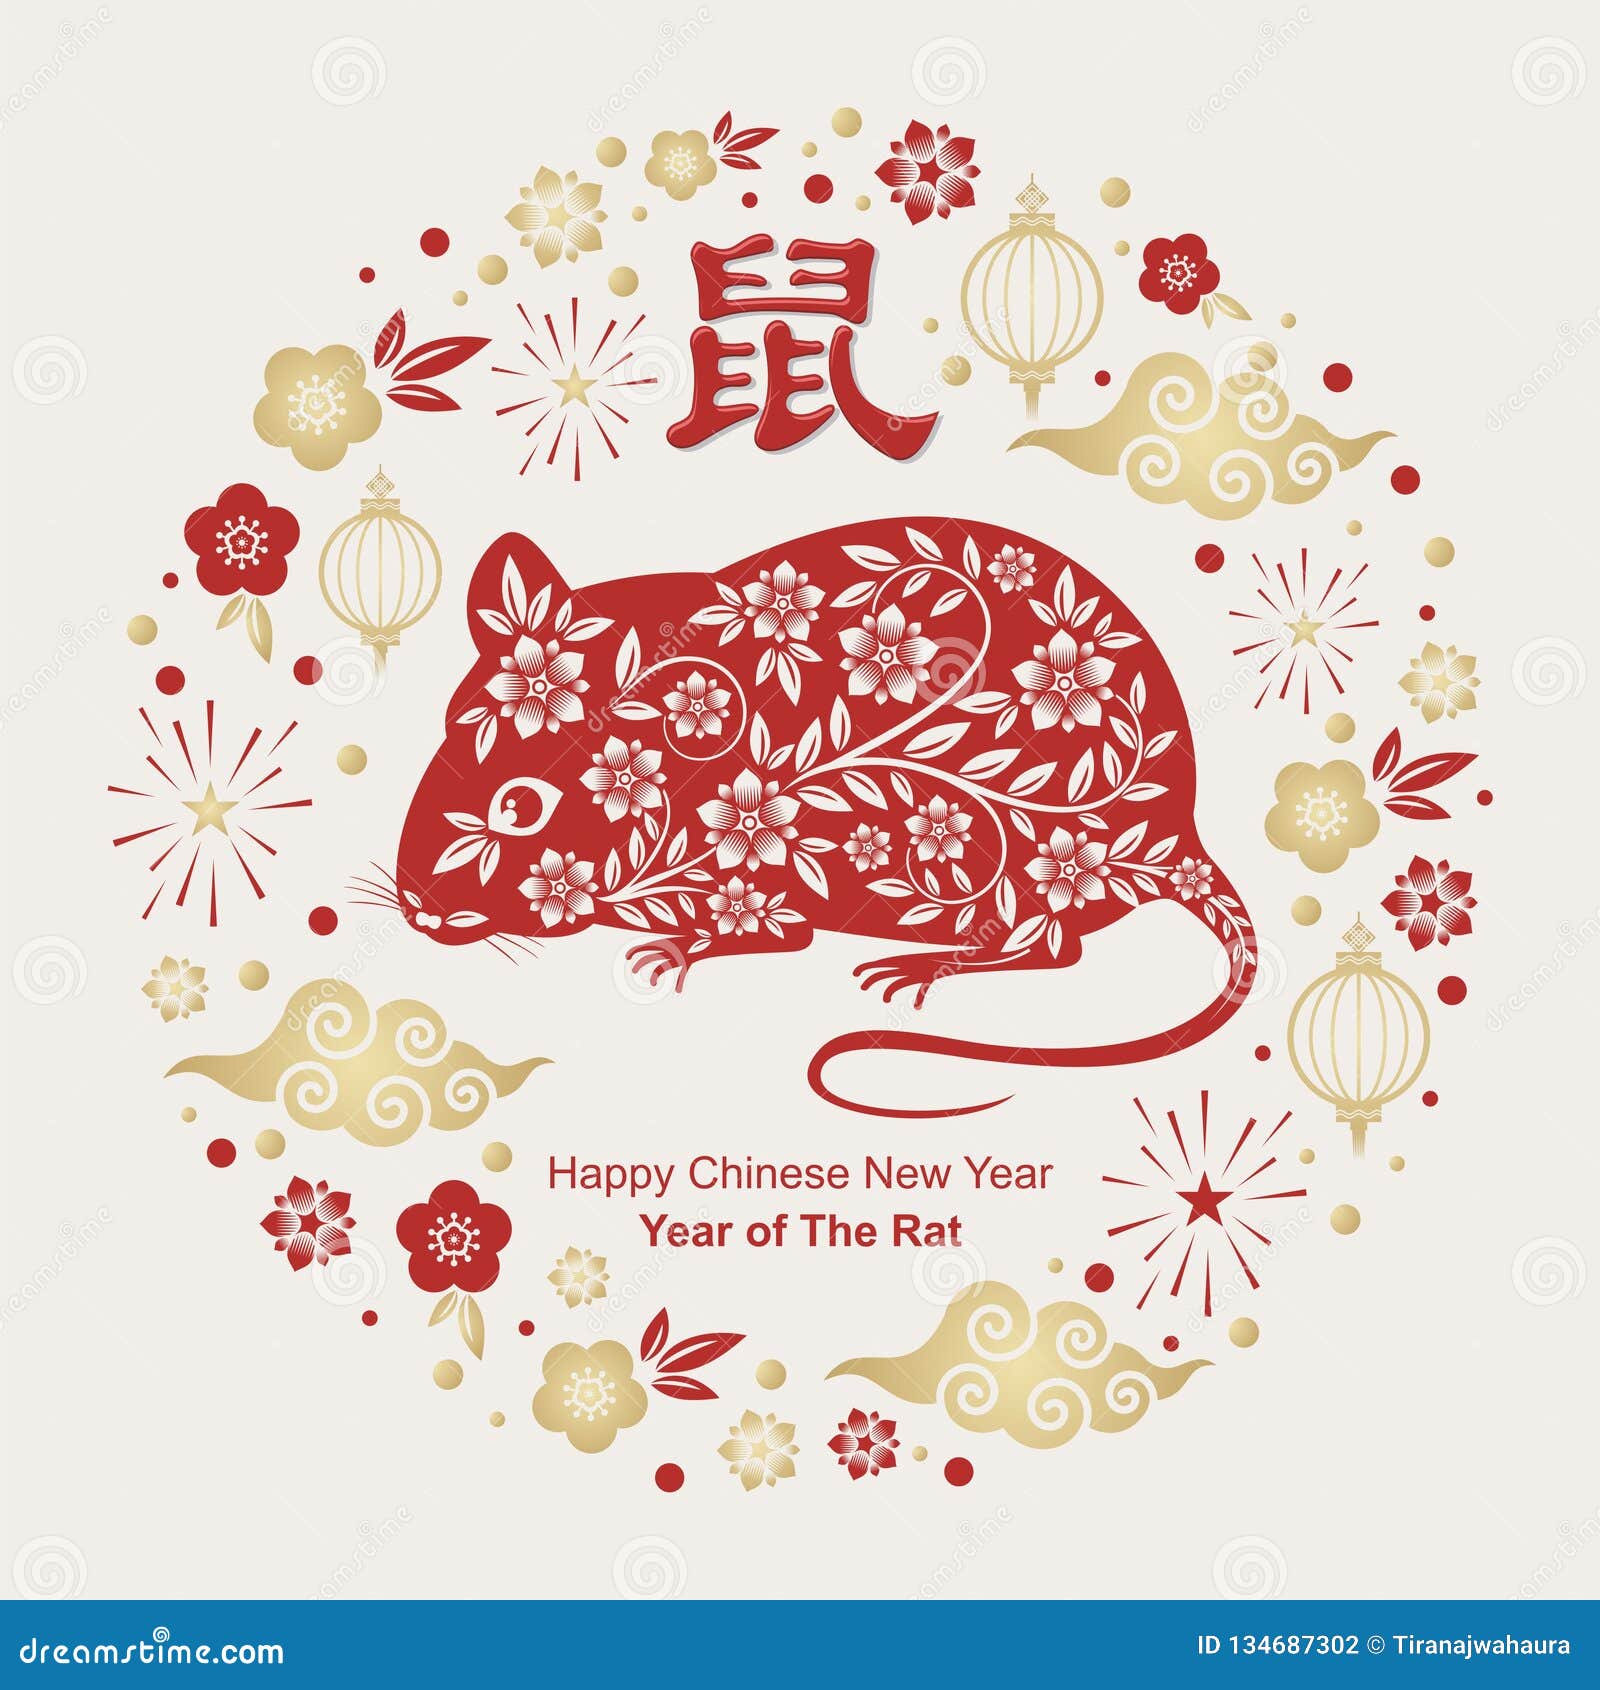 Year Of The Rat, Chinese New Year Vector Design Stock Vector - Illustration of culture ...